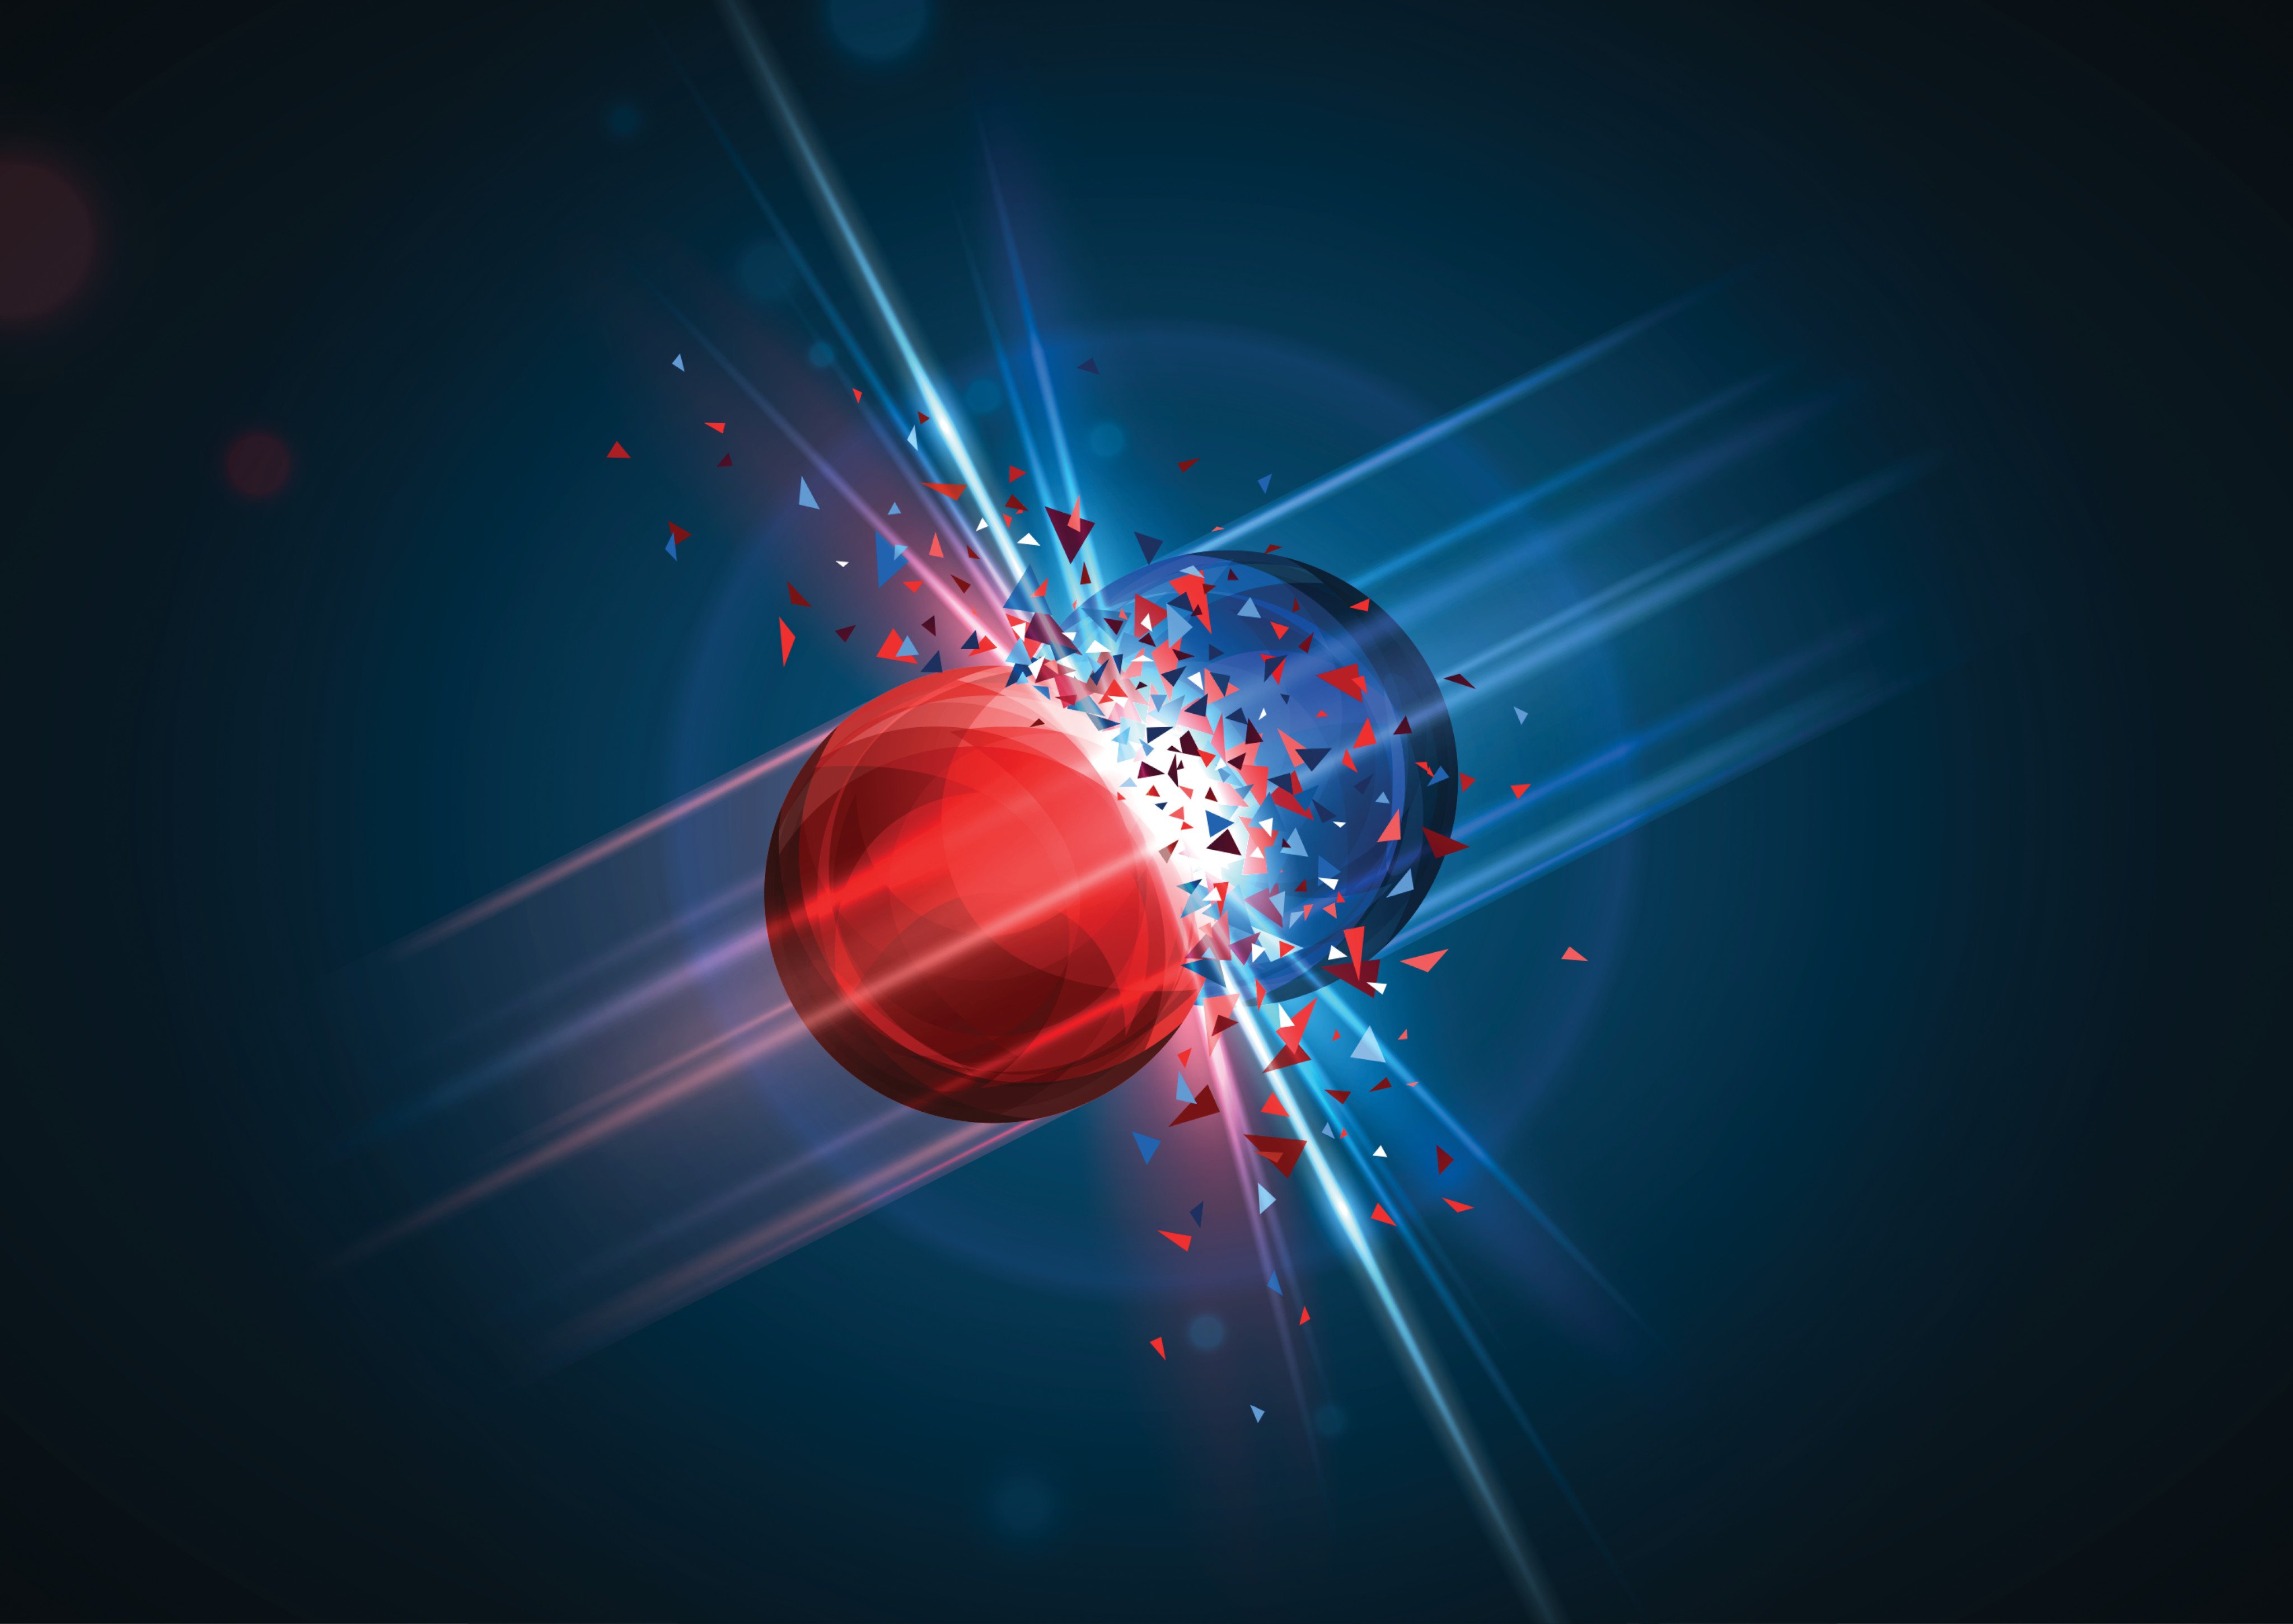 According to the Standard Model, glueballs consist of gluons – a massless, “sticky” particle that bonds quarks together to form protons, neutrons and other components of matter in an interaction known as the strong nuclear force. Photo: Shutterstock